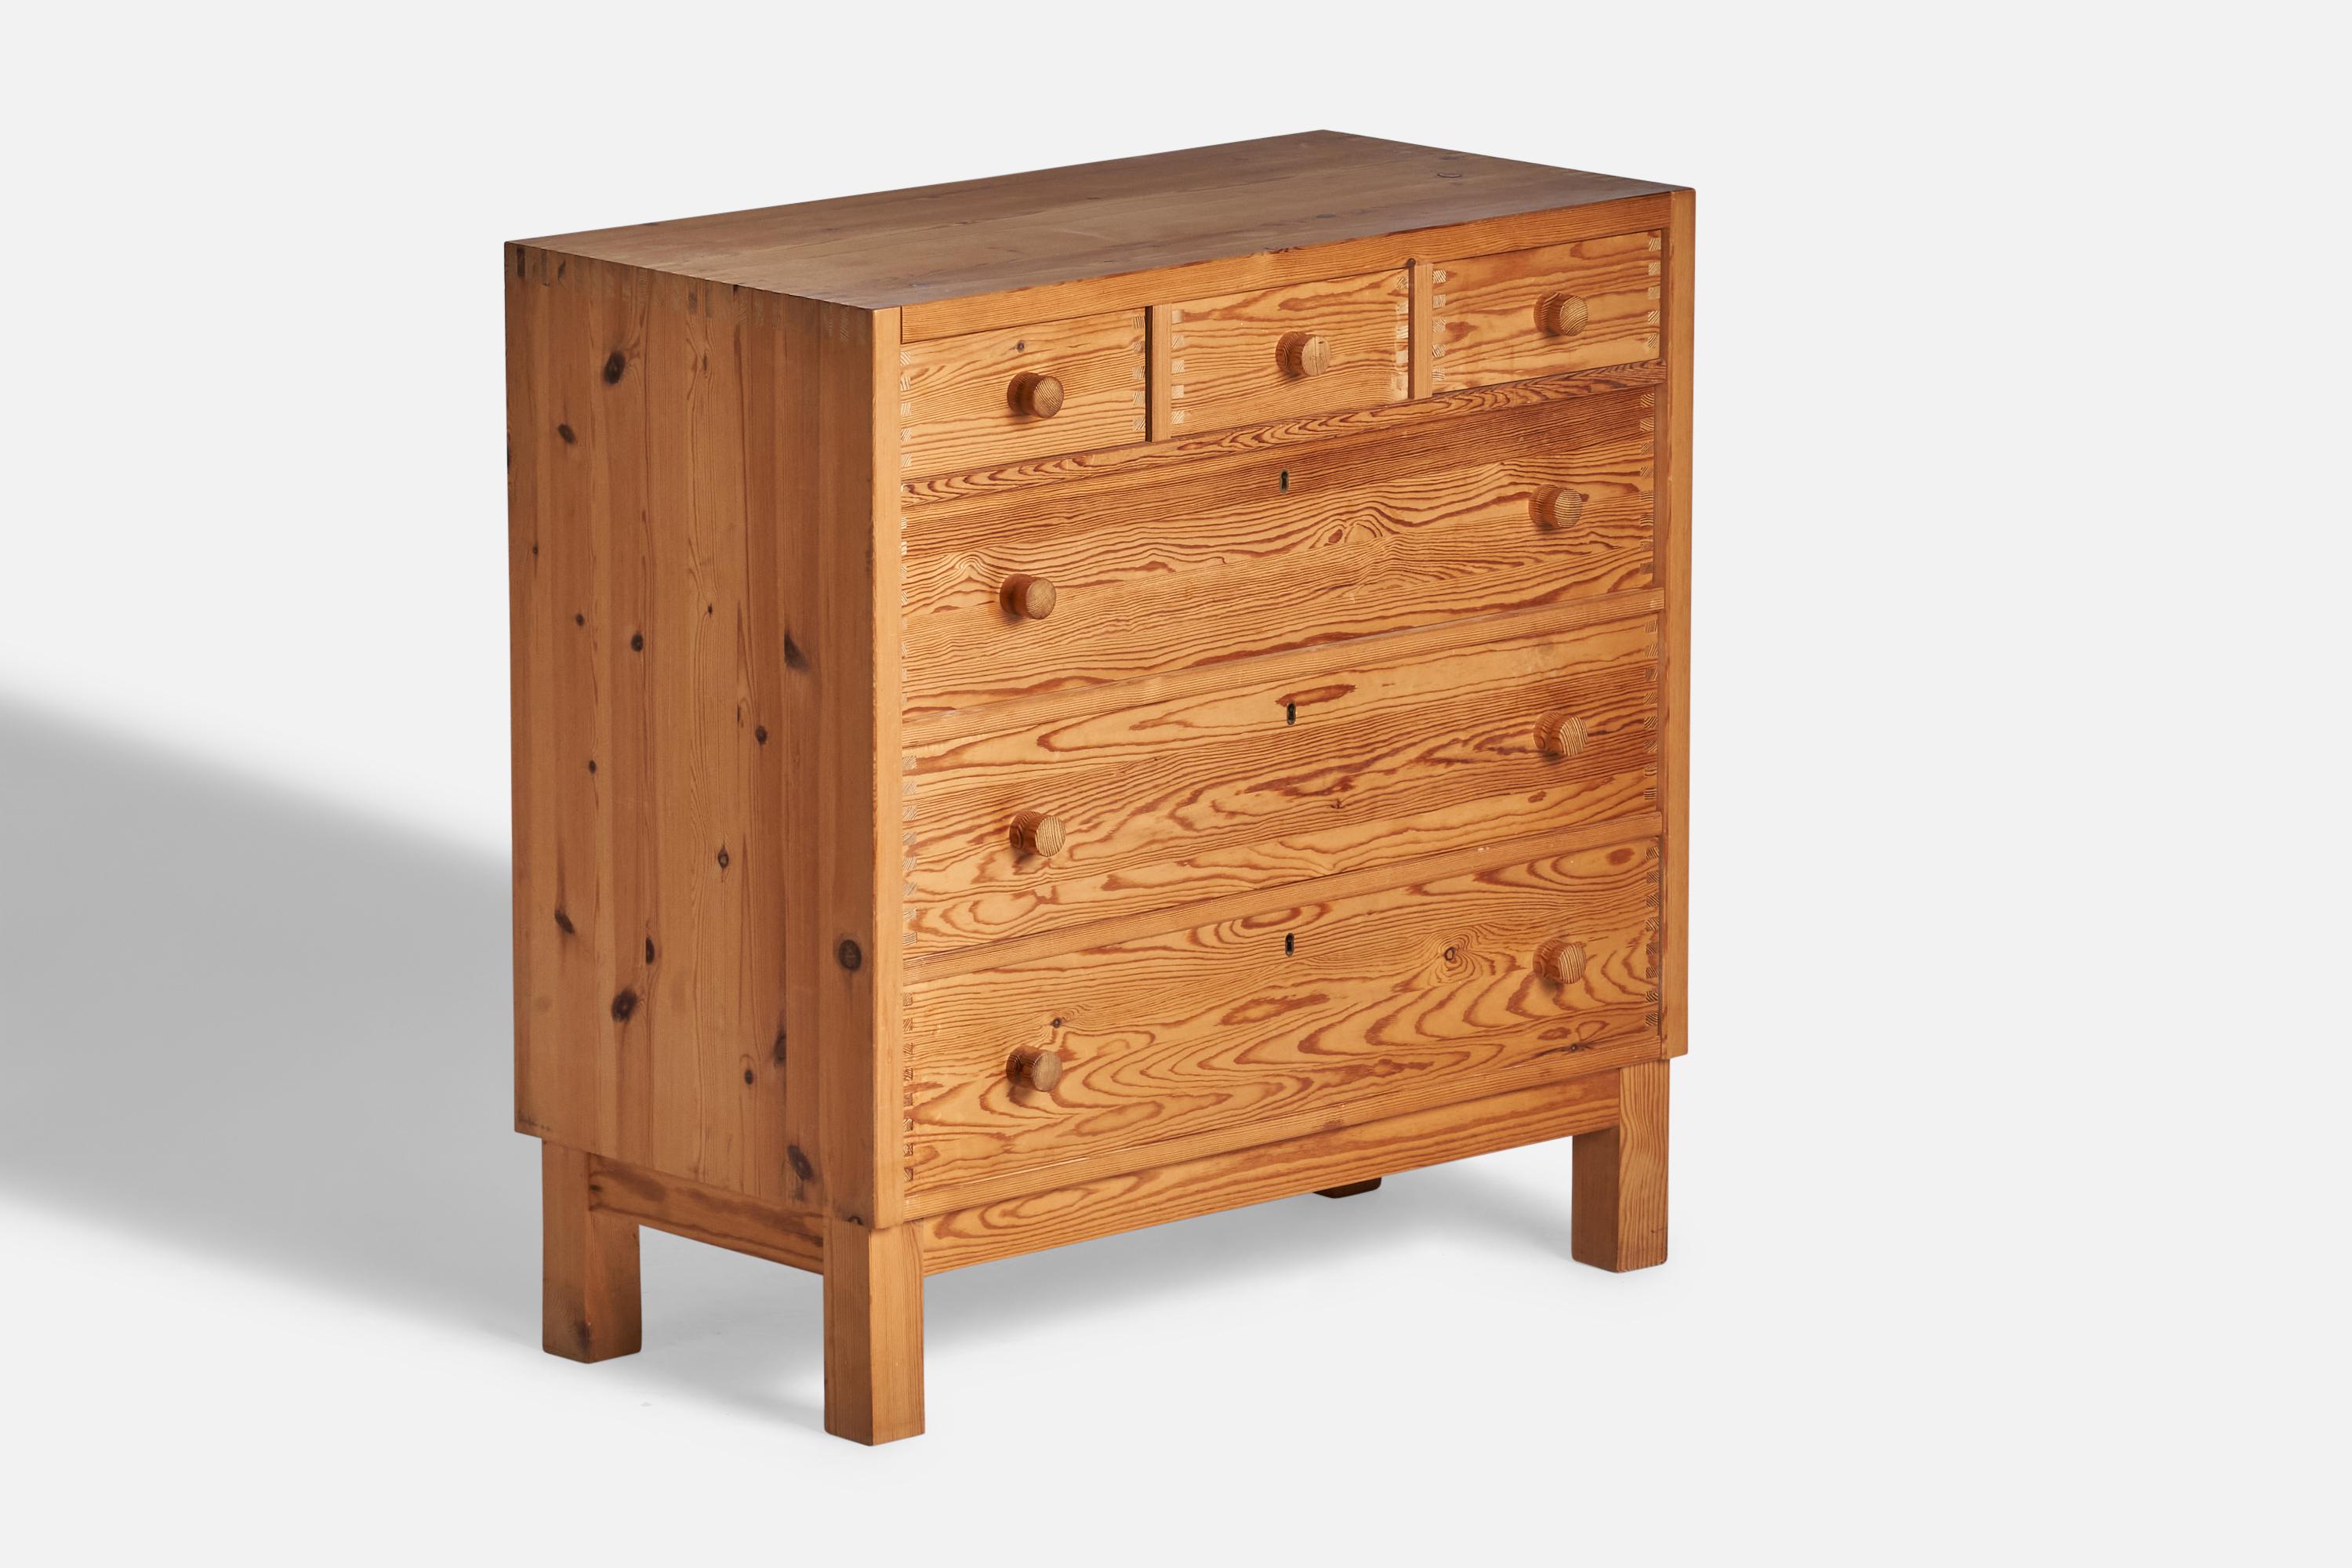 A pine chest of drawers designed and produced in Denmark, 1970s.